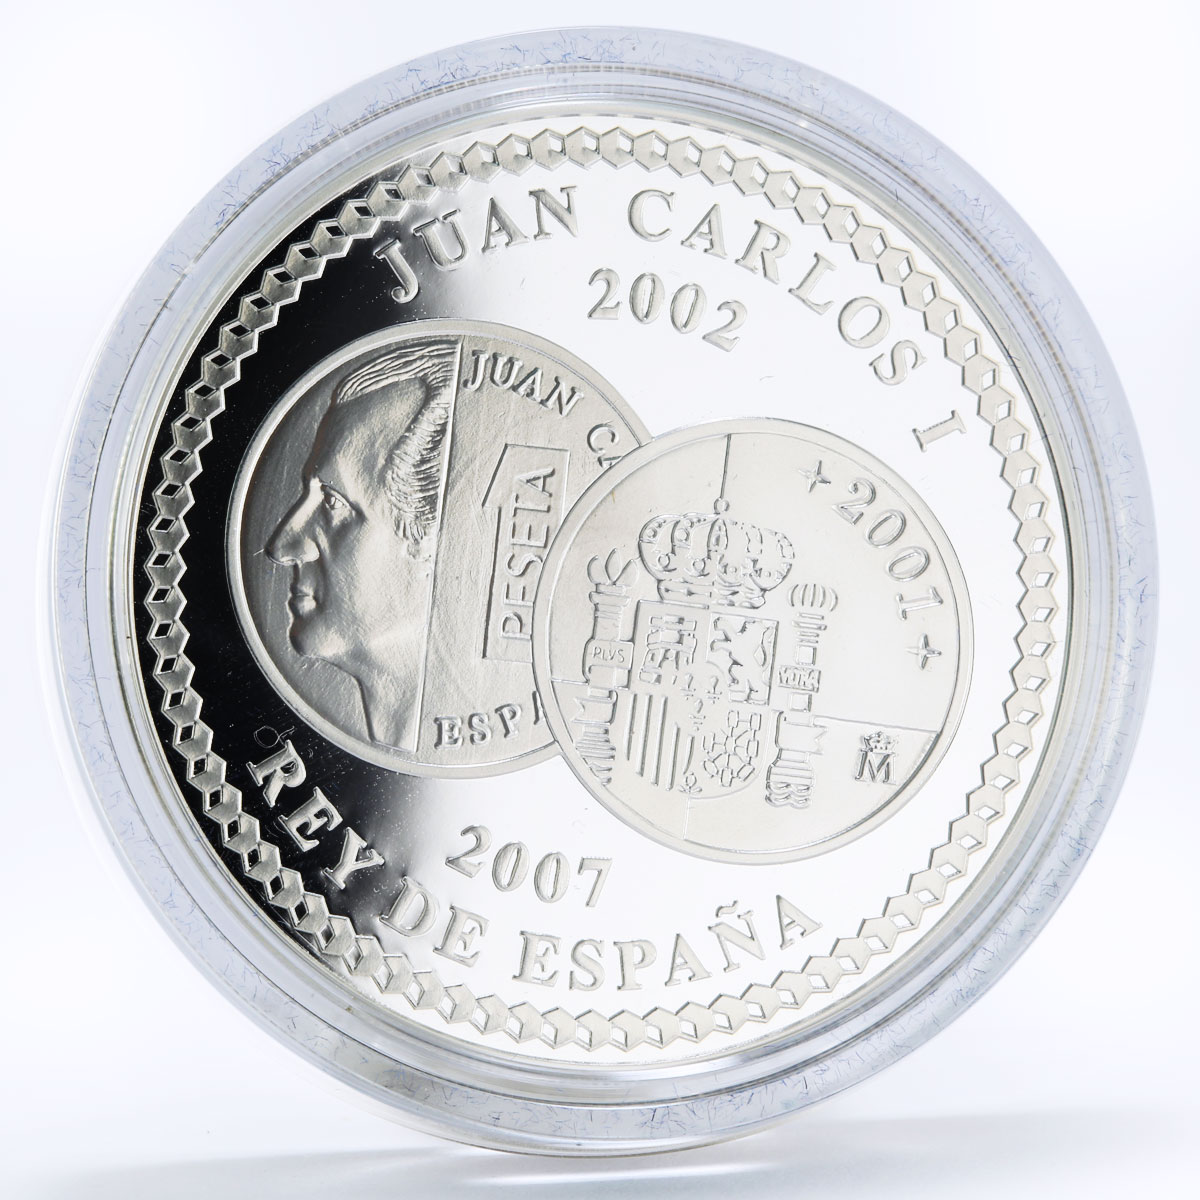 Spain 10 euro 5th Anniversary of the Euro proof silver coin 2007